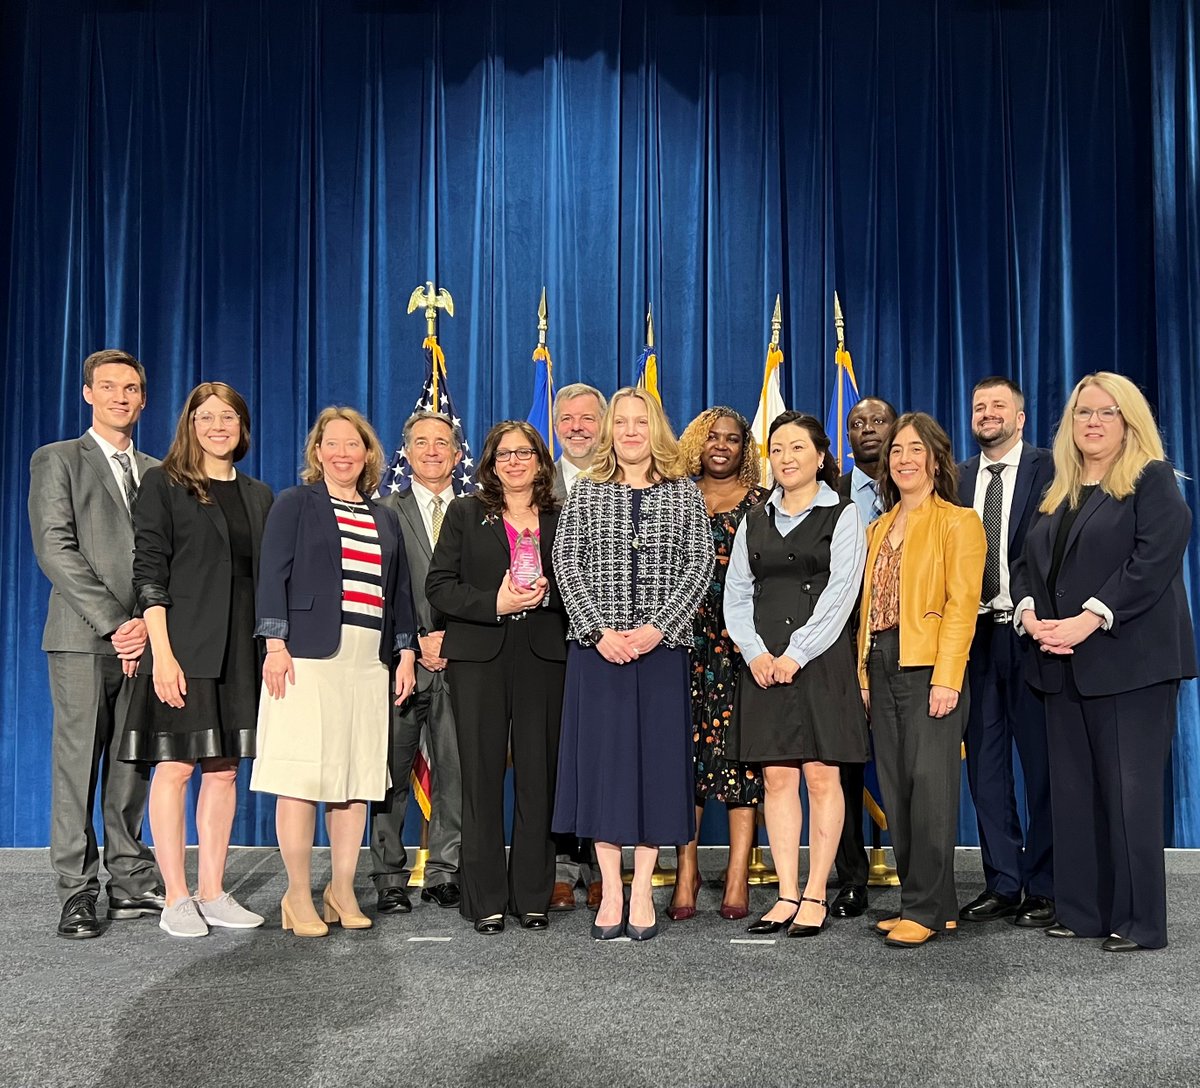 #HRSA Administrator Johnson joined @SecBecerra & @HHSGov Deputy Secretary Palm at the Department’s Award Ceremony to congratulate HRSA’s winners for their exemplary public service contributions. #PSRW #GovPossible